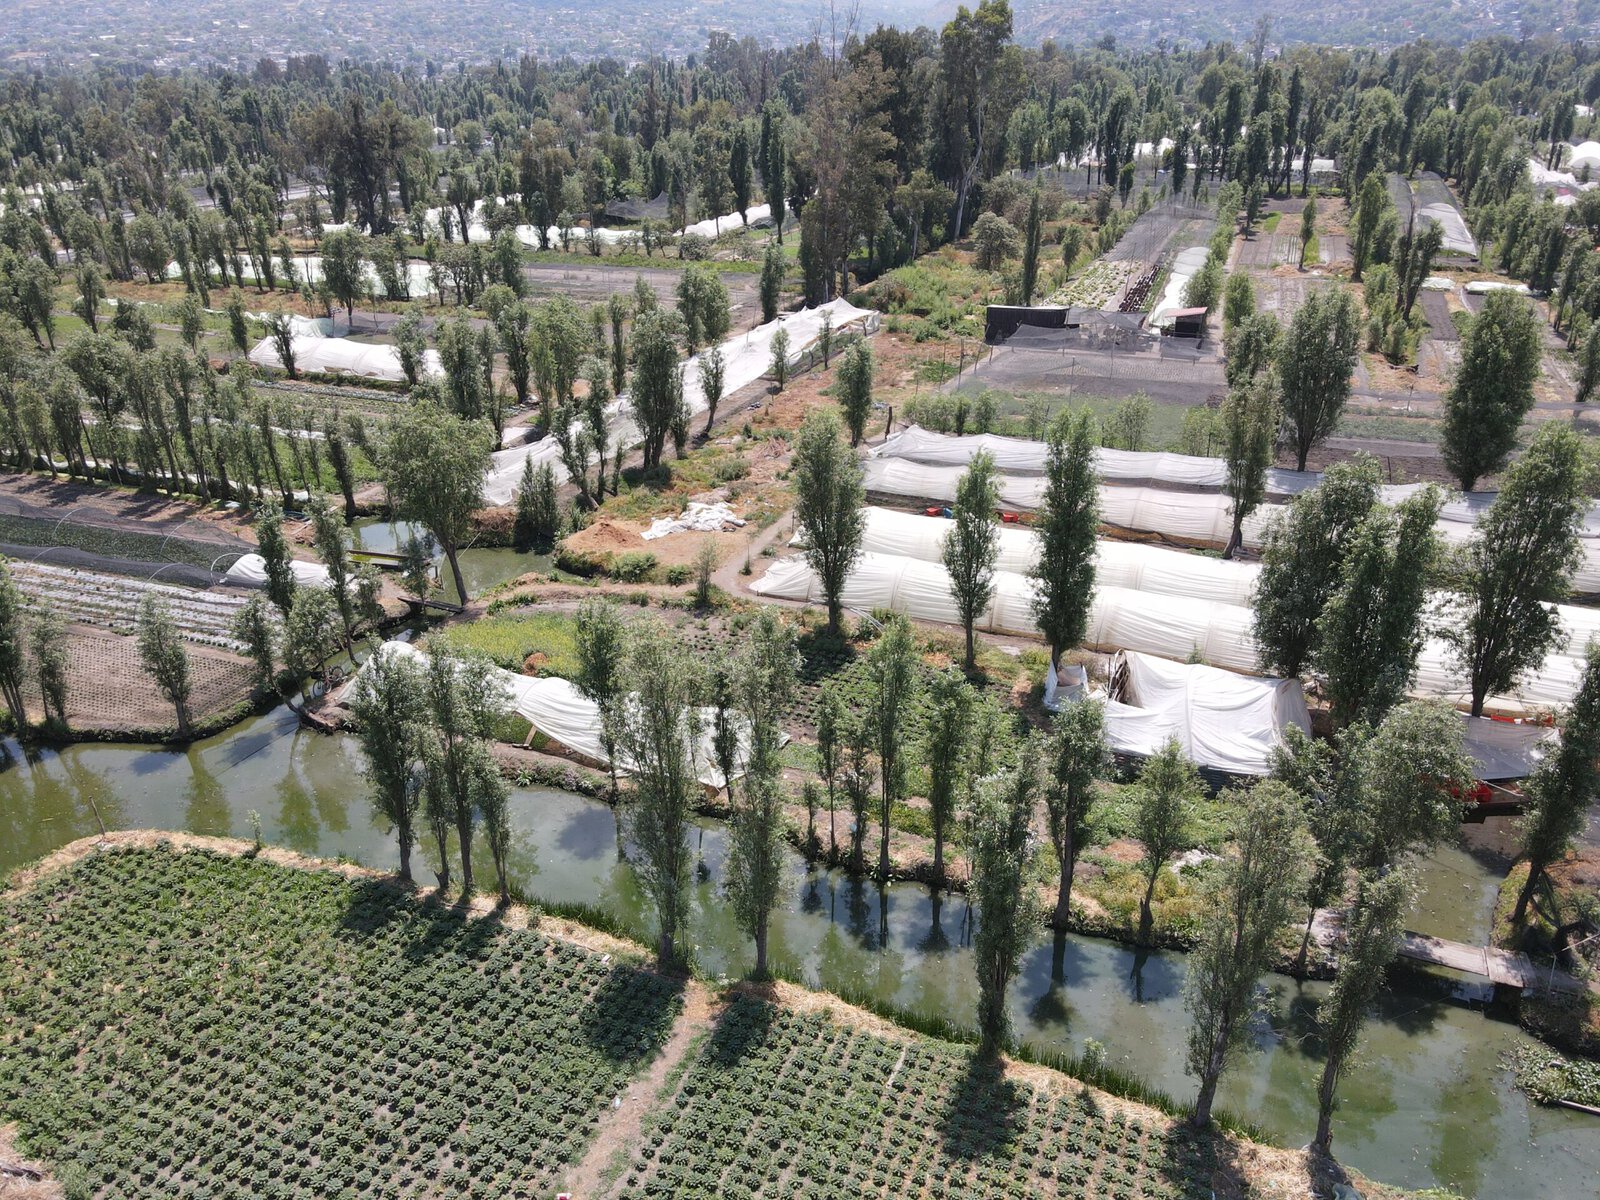 An aerial view of chinampas, floating gardens, with trees growing at their edges.